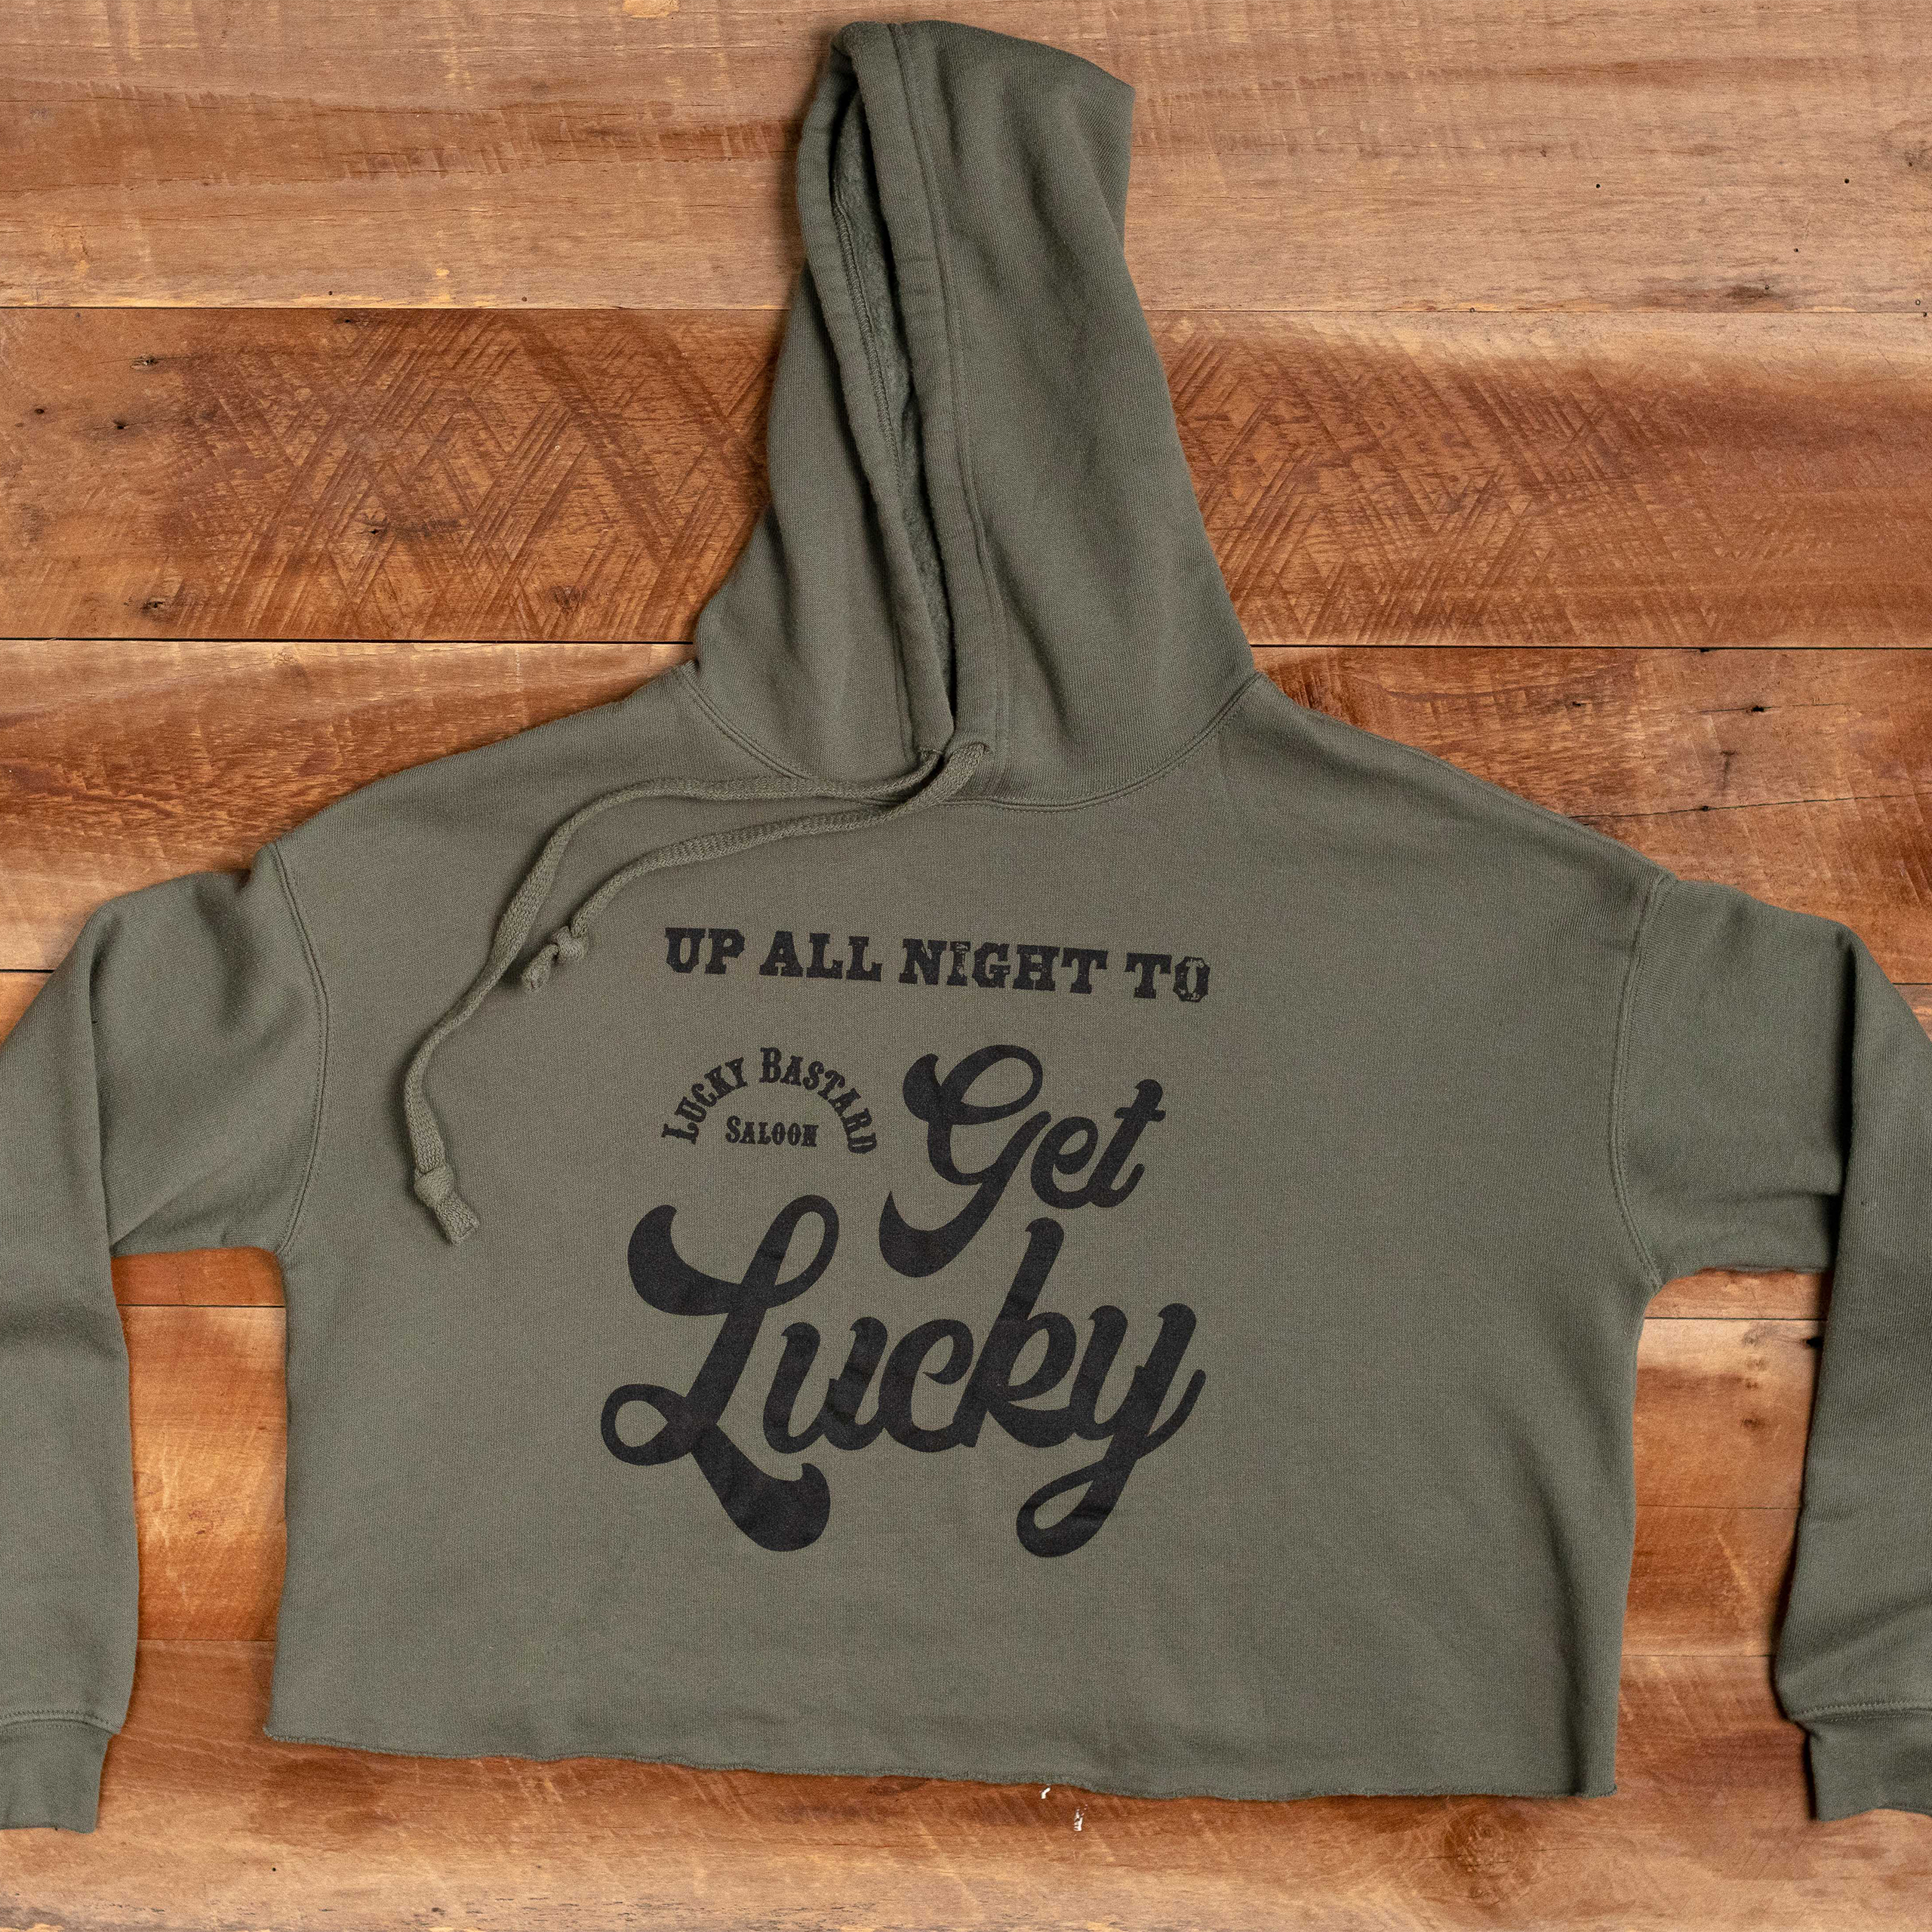 LBS Cropped Hoodie in gray color on the table